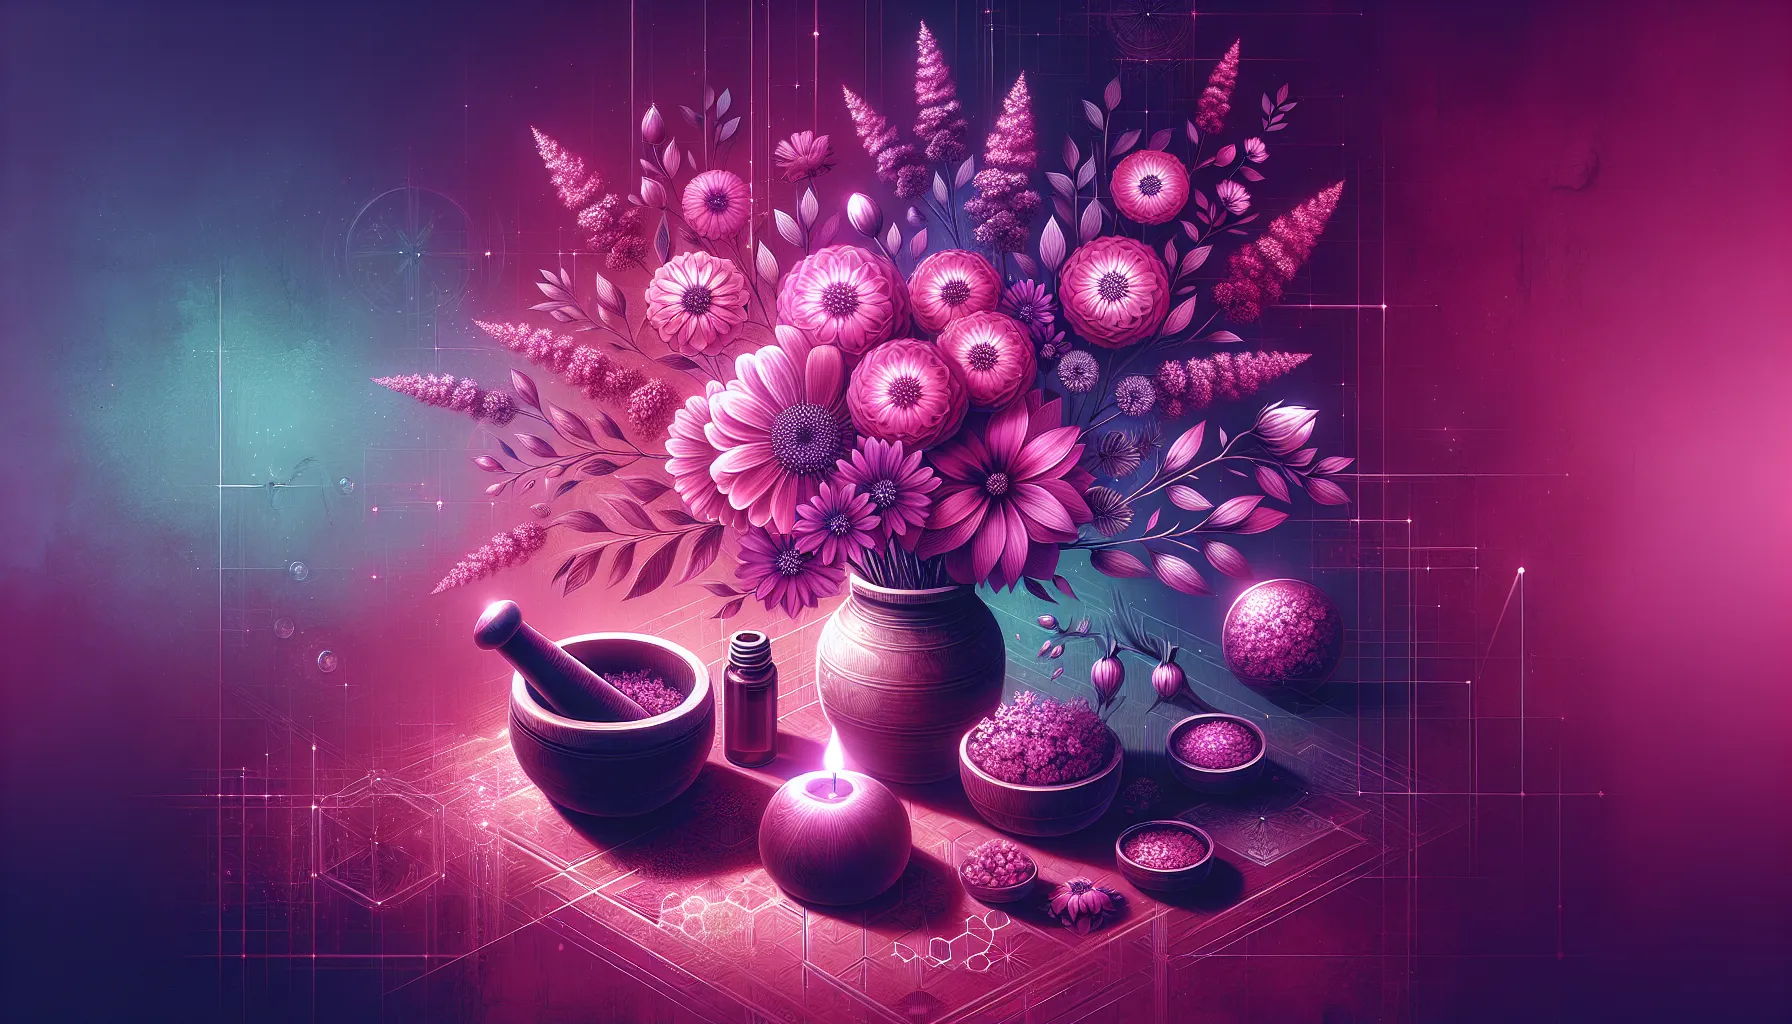 A digital illustration of a vibrant arrangement of magenta flowers in a vase, accompanied by bowls with botanical ingredients and a lit candle on a geometric-patterned surface.